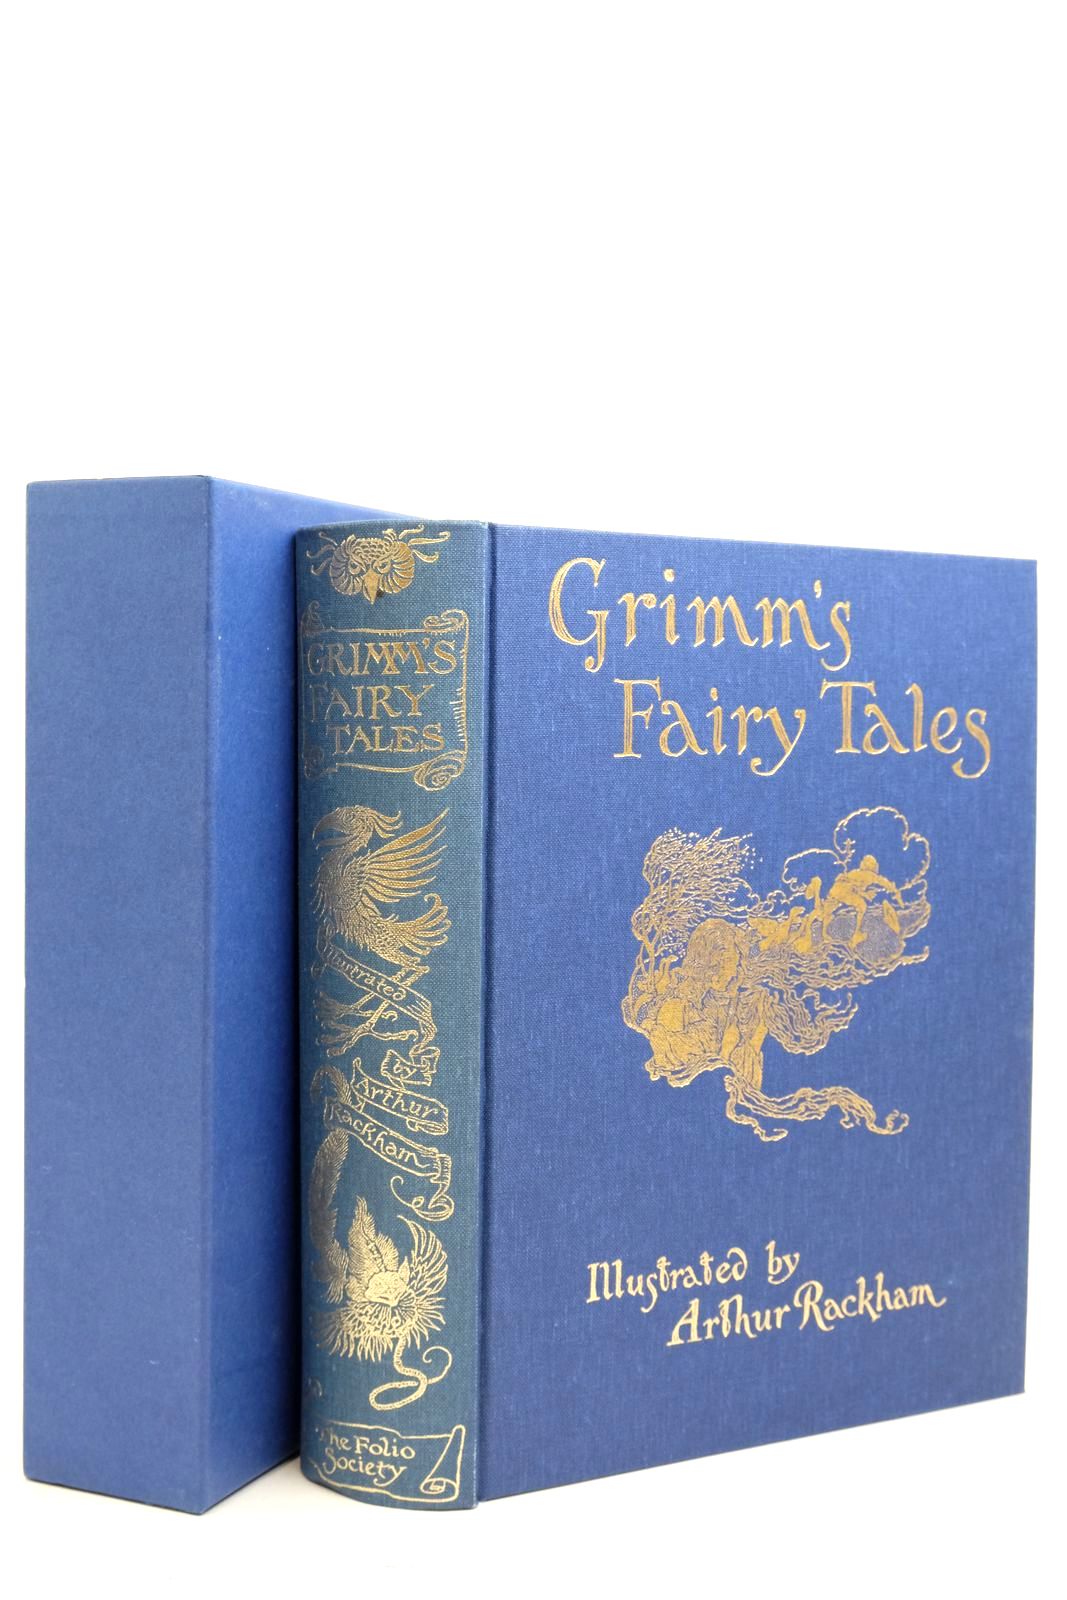 Photo of THE FAIRY TALES OF THE BROTHERS GRIMM written by Grimm, Brothers illustrated by Rackham, Arthur published by Folio Society (STOCK CODE: 2140256)  for sale by Stella & Rose's Books